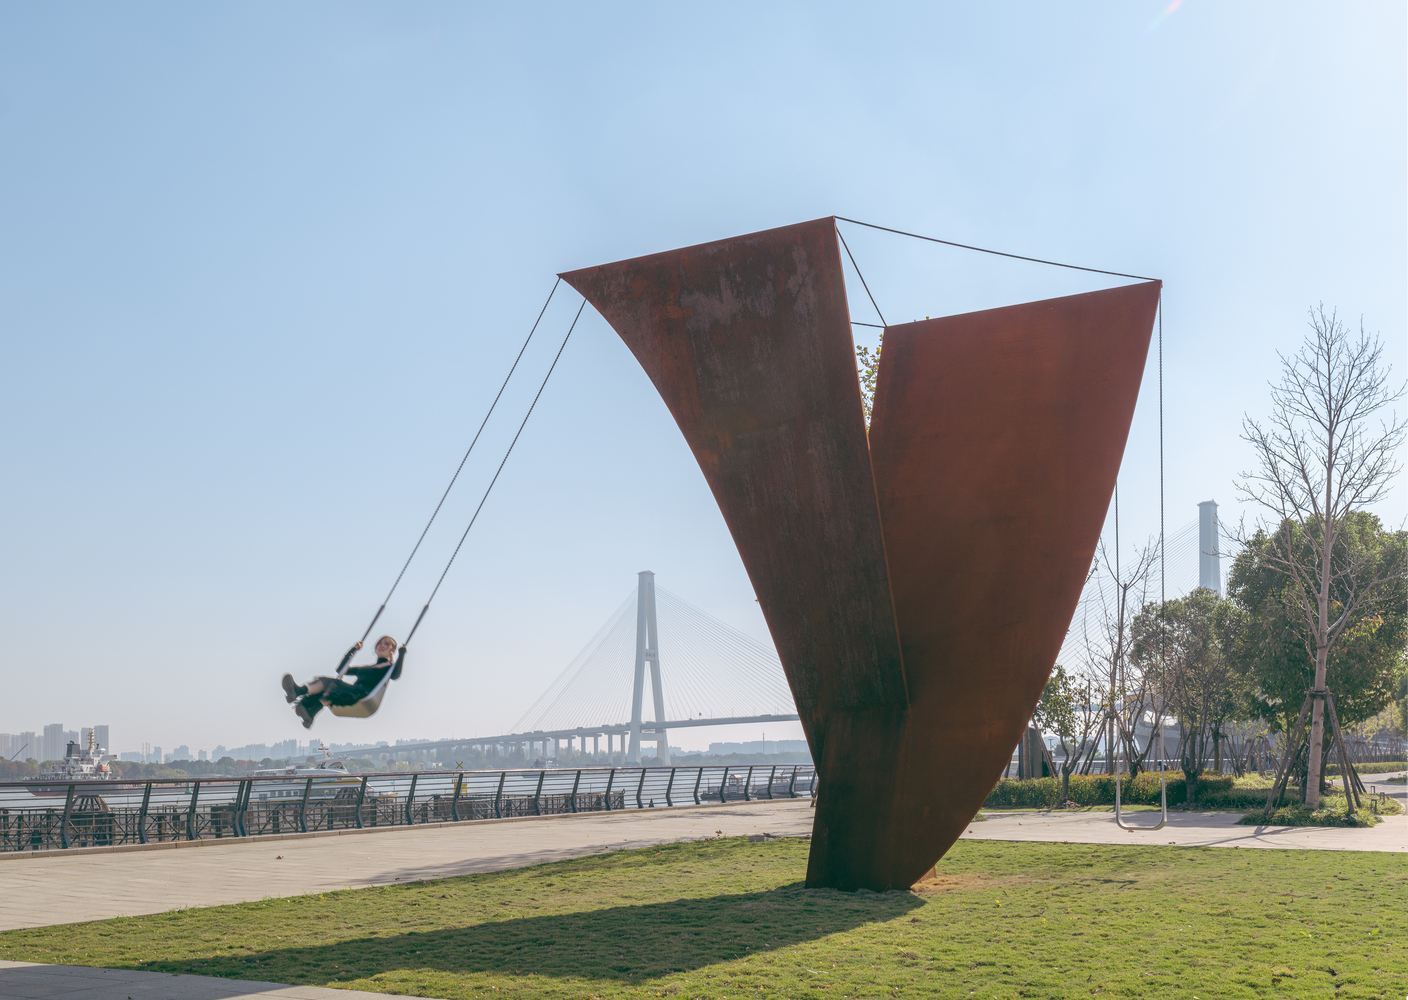 A Criss-crossed Steel Structure by DL Atelier Swings the Stress Away